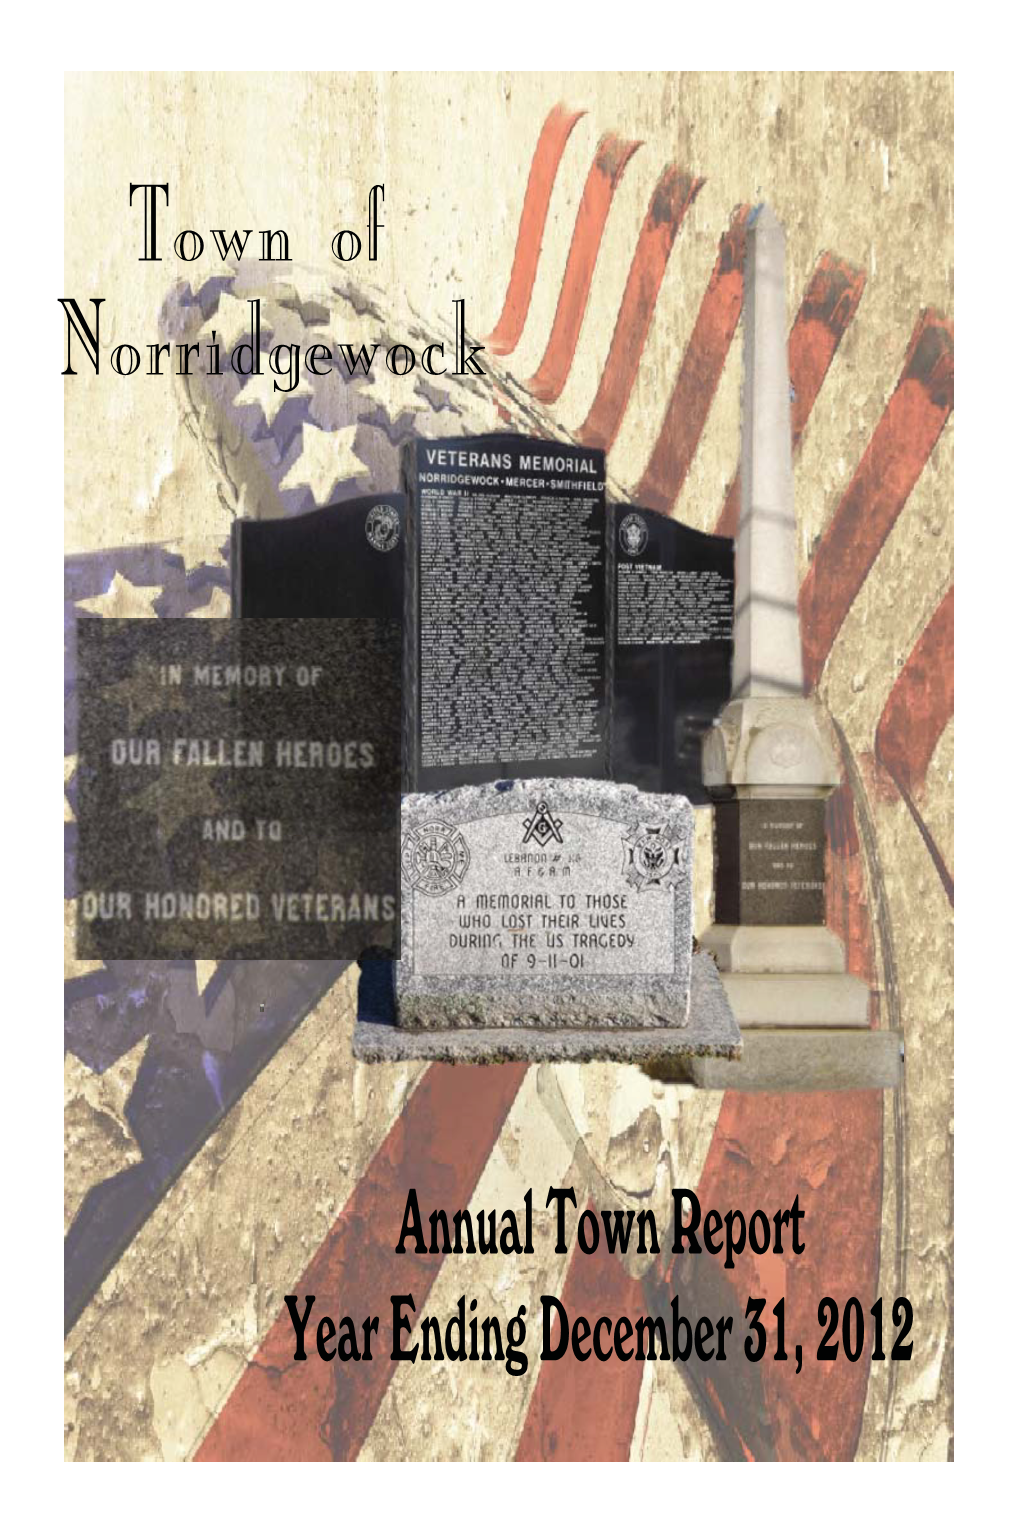 Annual Town Report for Year Ending December 31, 2012